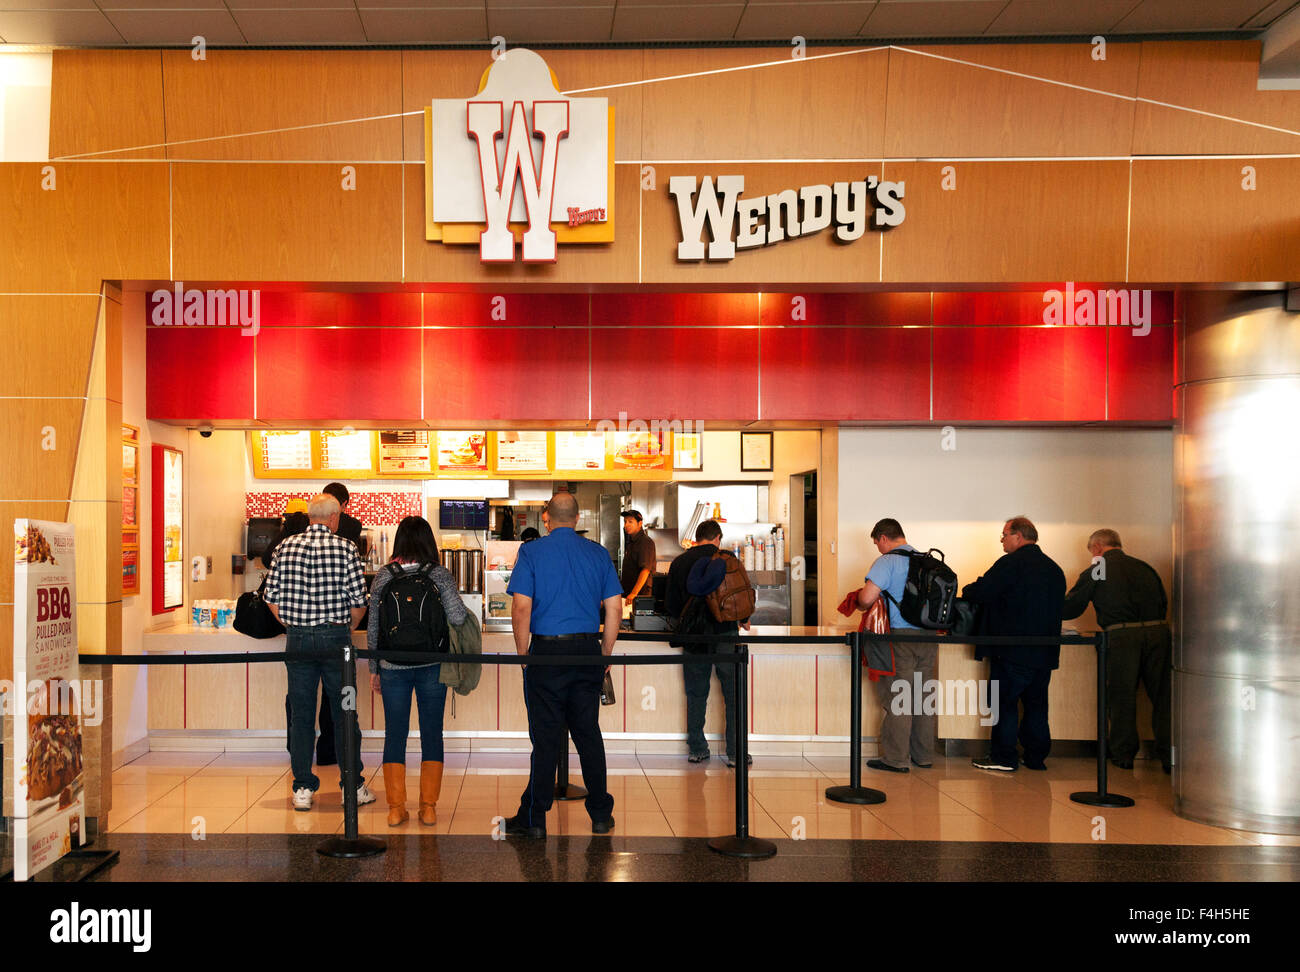 People waiting in a queue, Wendys fast food restaurant outlet, Logan international airport terminal, Boston USA Stock Photo